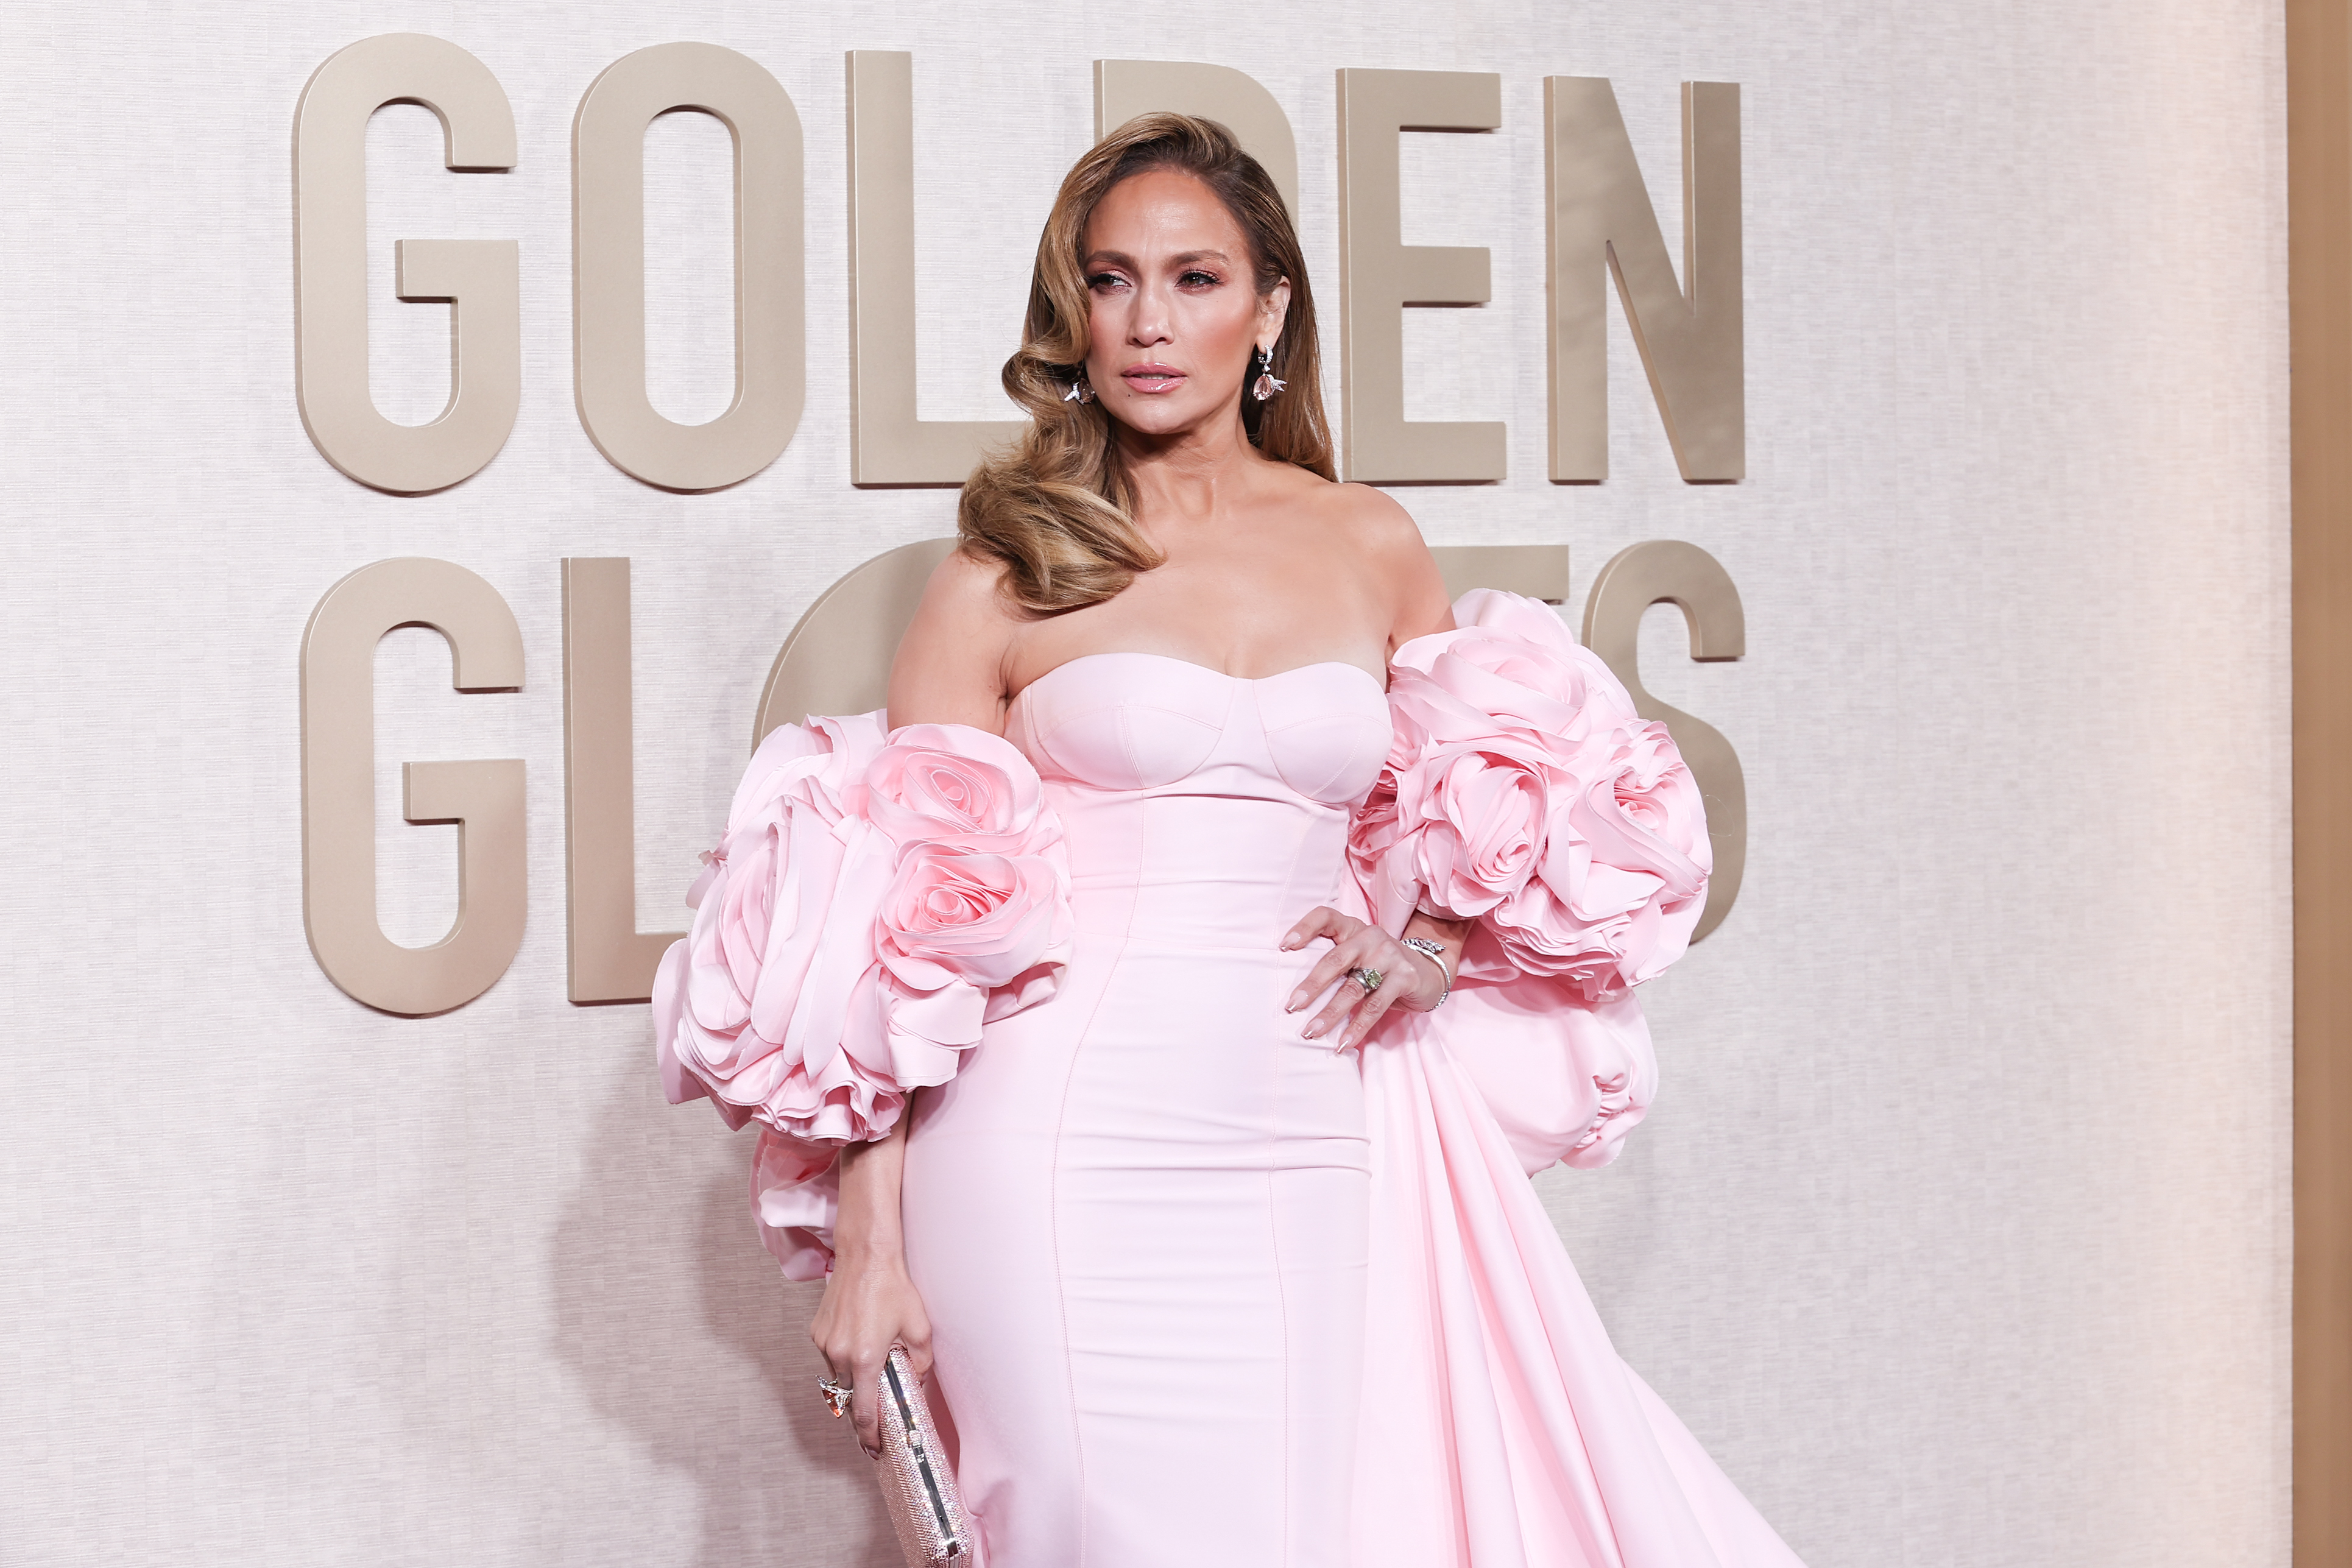 Jennifer Lopez in a strapless gown with large floral embellishments on the sleeves at the Golden Globes